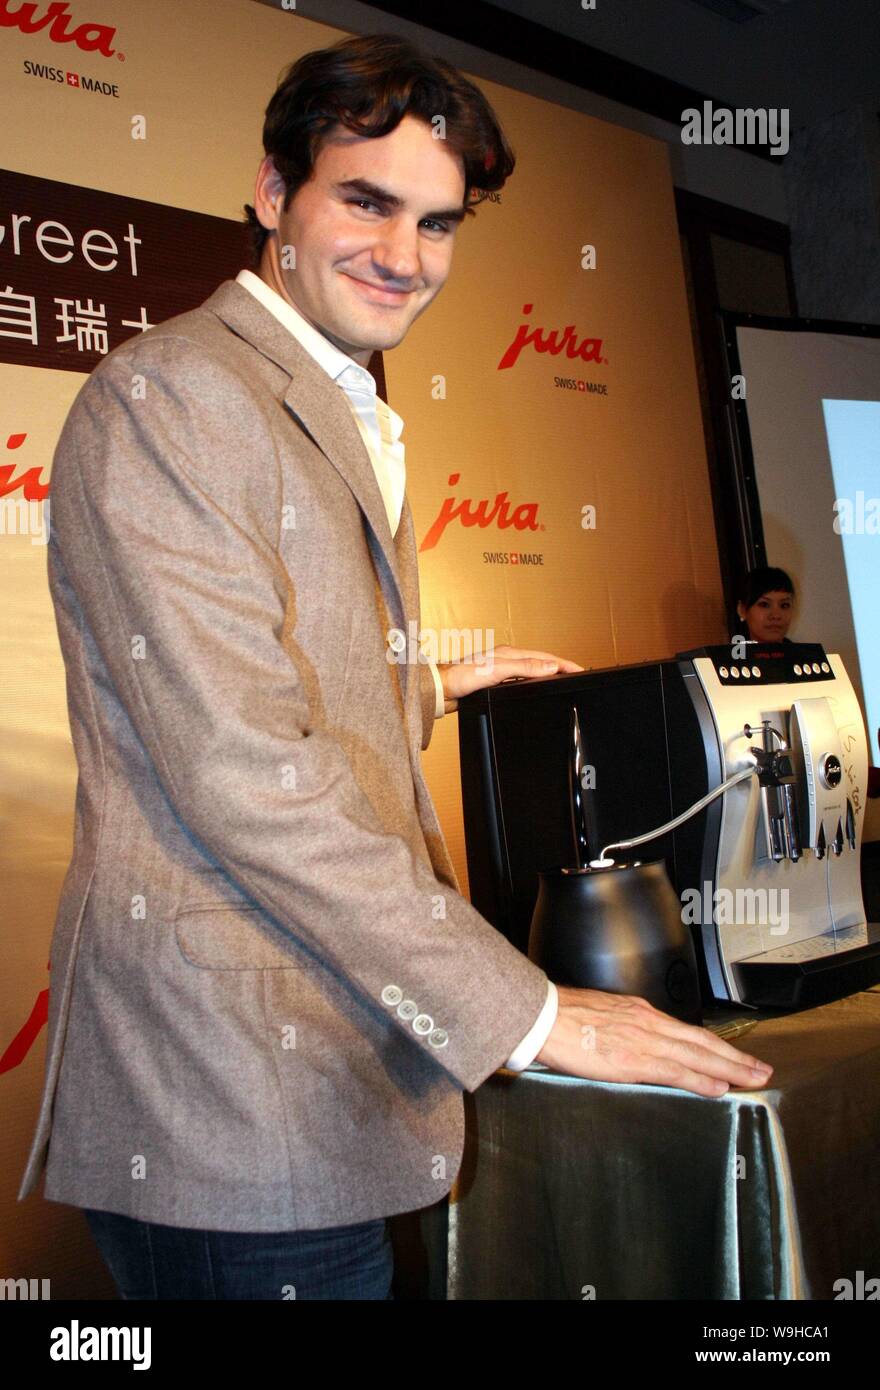 Roger Federer of Switzerland poses during a promotional event for Jura, a  Swiss brand of coffee machine, in Shanghai, November 8, 2007 Stock Photo -  Alamy